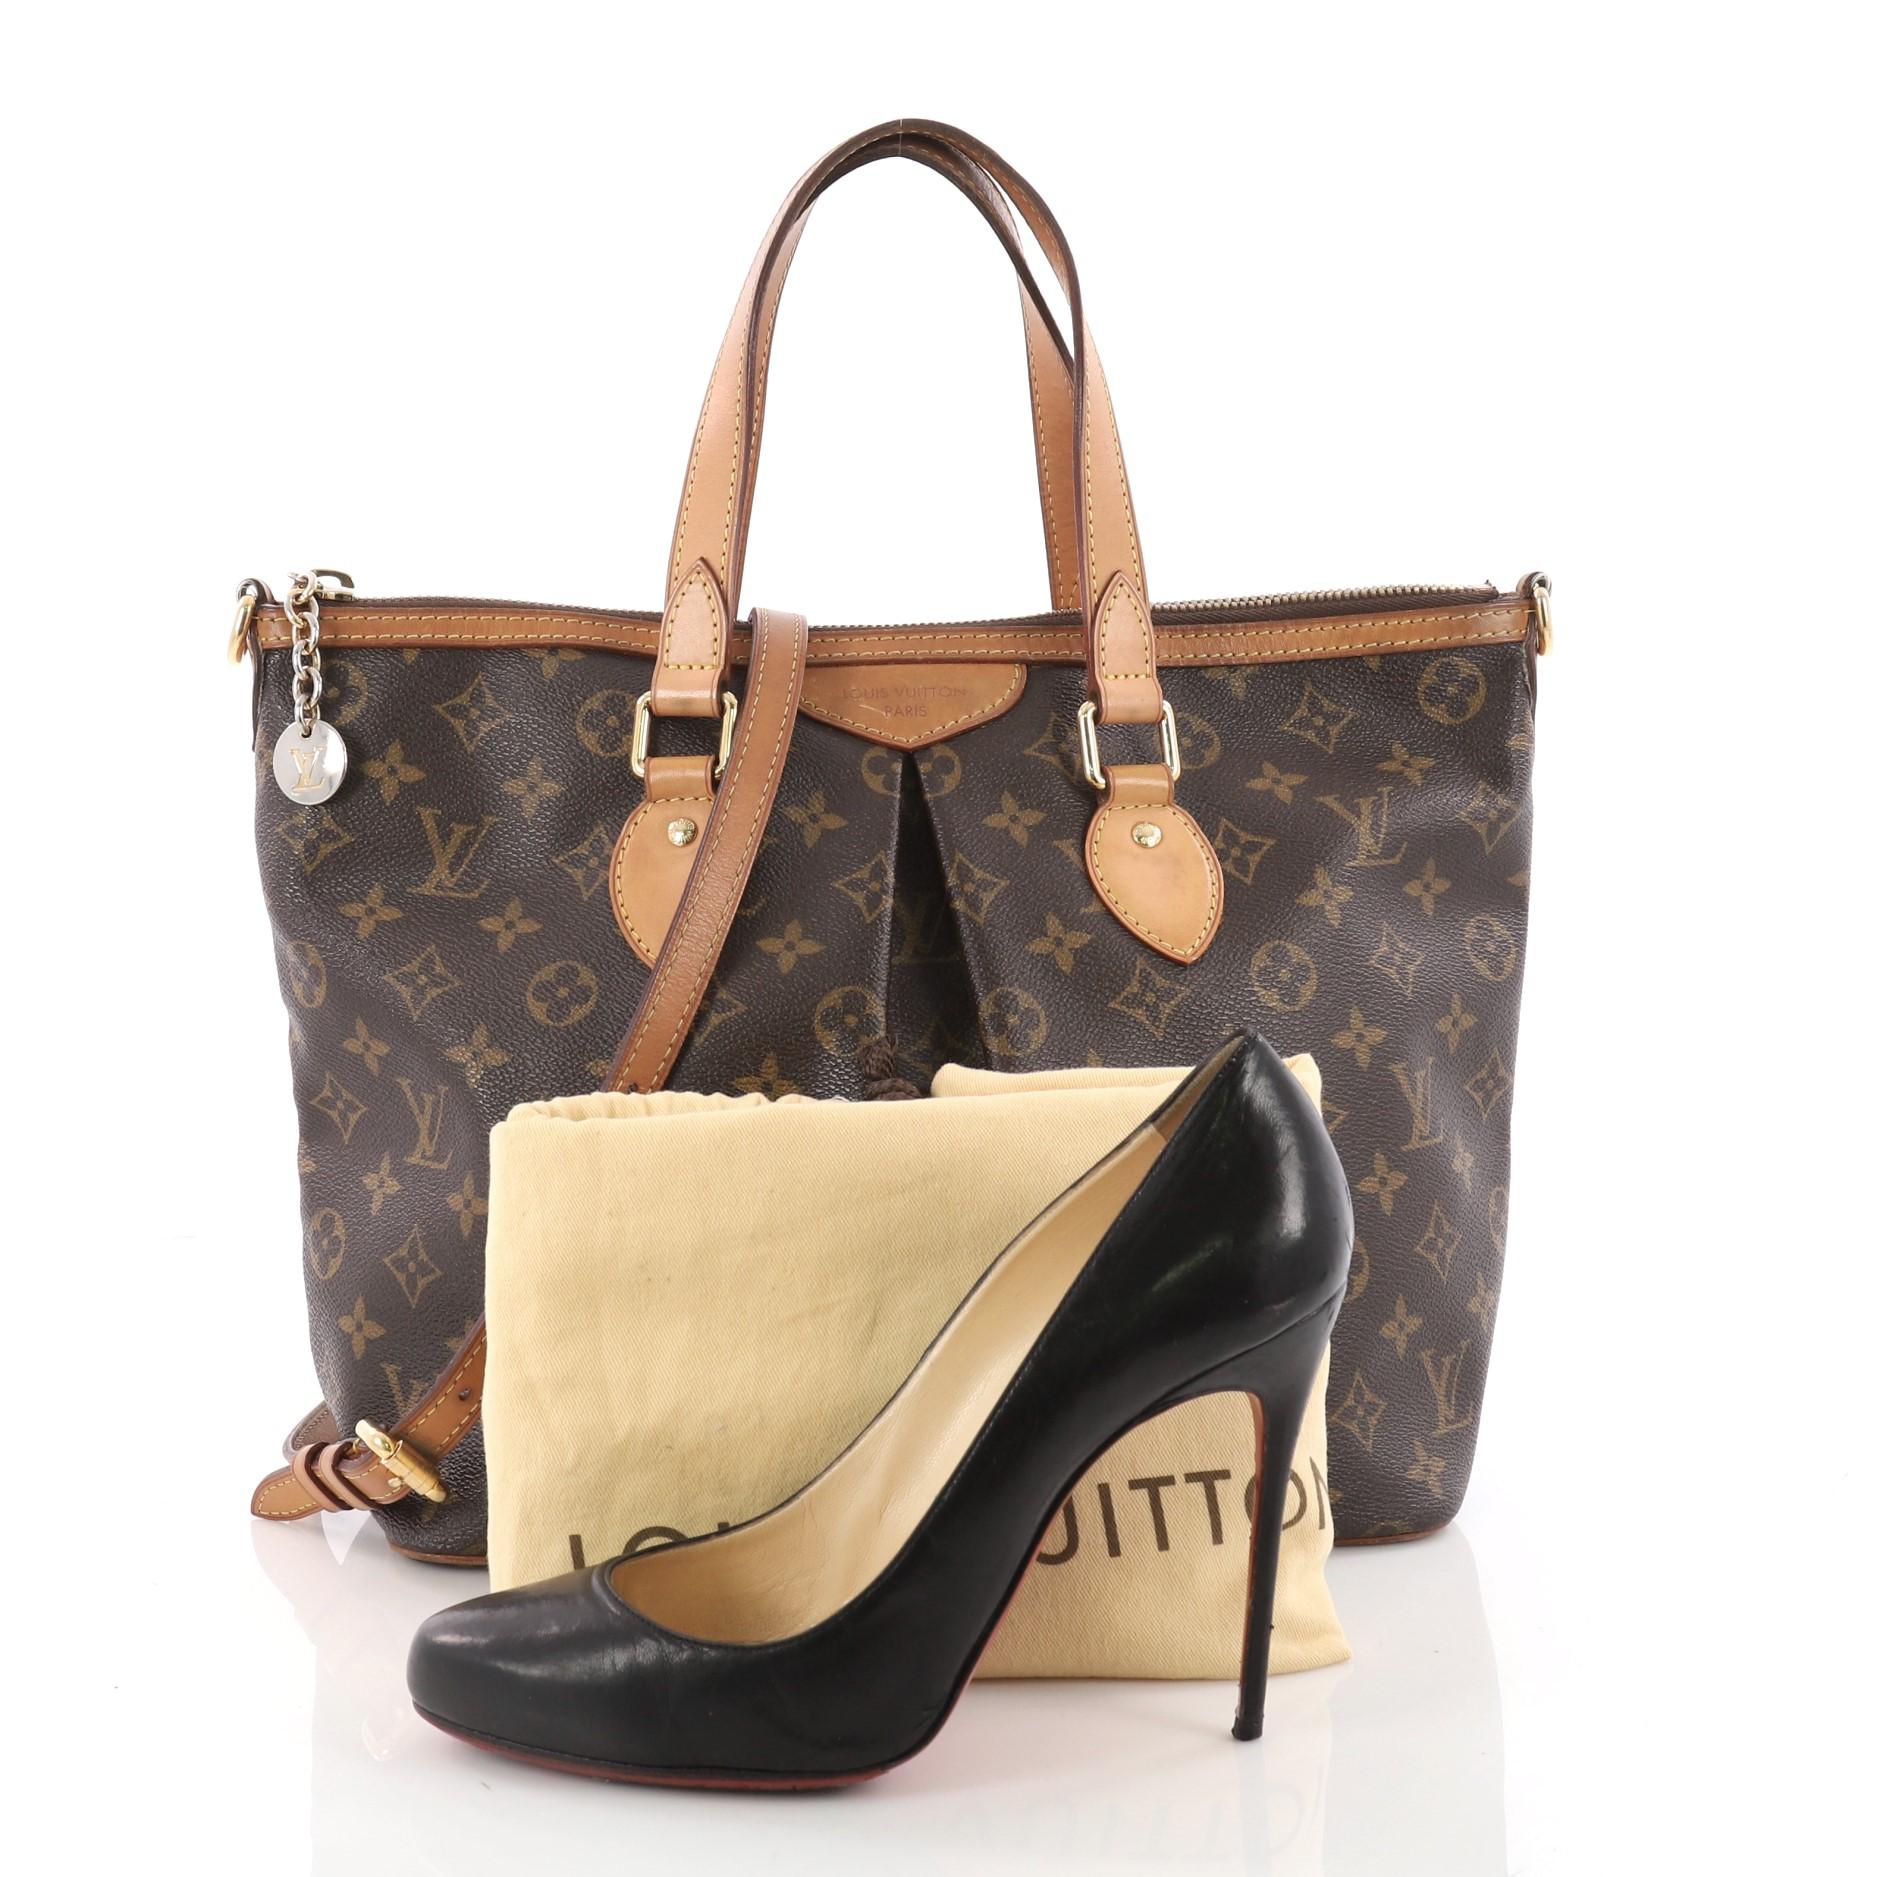 This authentic Louis Vuitton Palermo Handbag Monogram Canvas PM is a must-have for the sophisticated on-the-go woman. Crafted with Louis Vuitton's classic brown monogram coated canvas with vachetta leather trims, this beautiful bag features